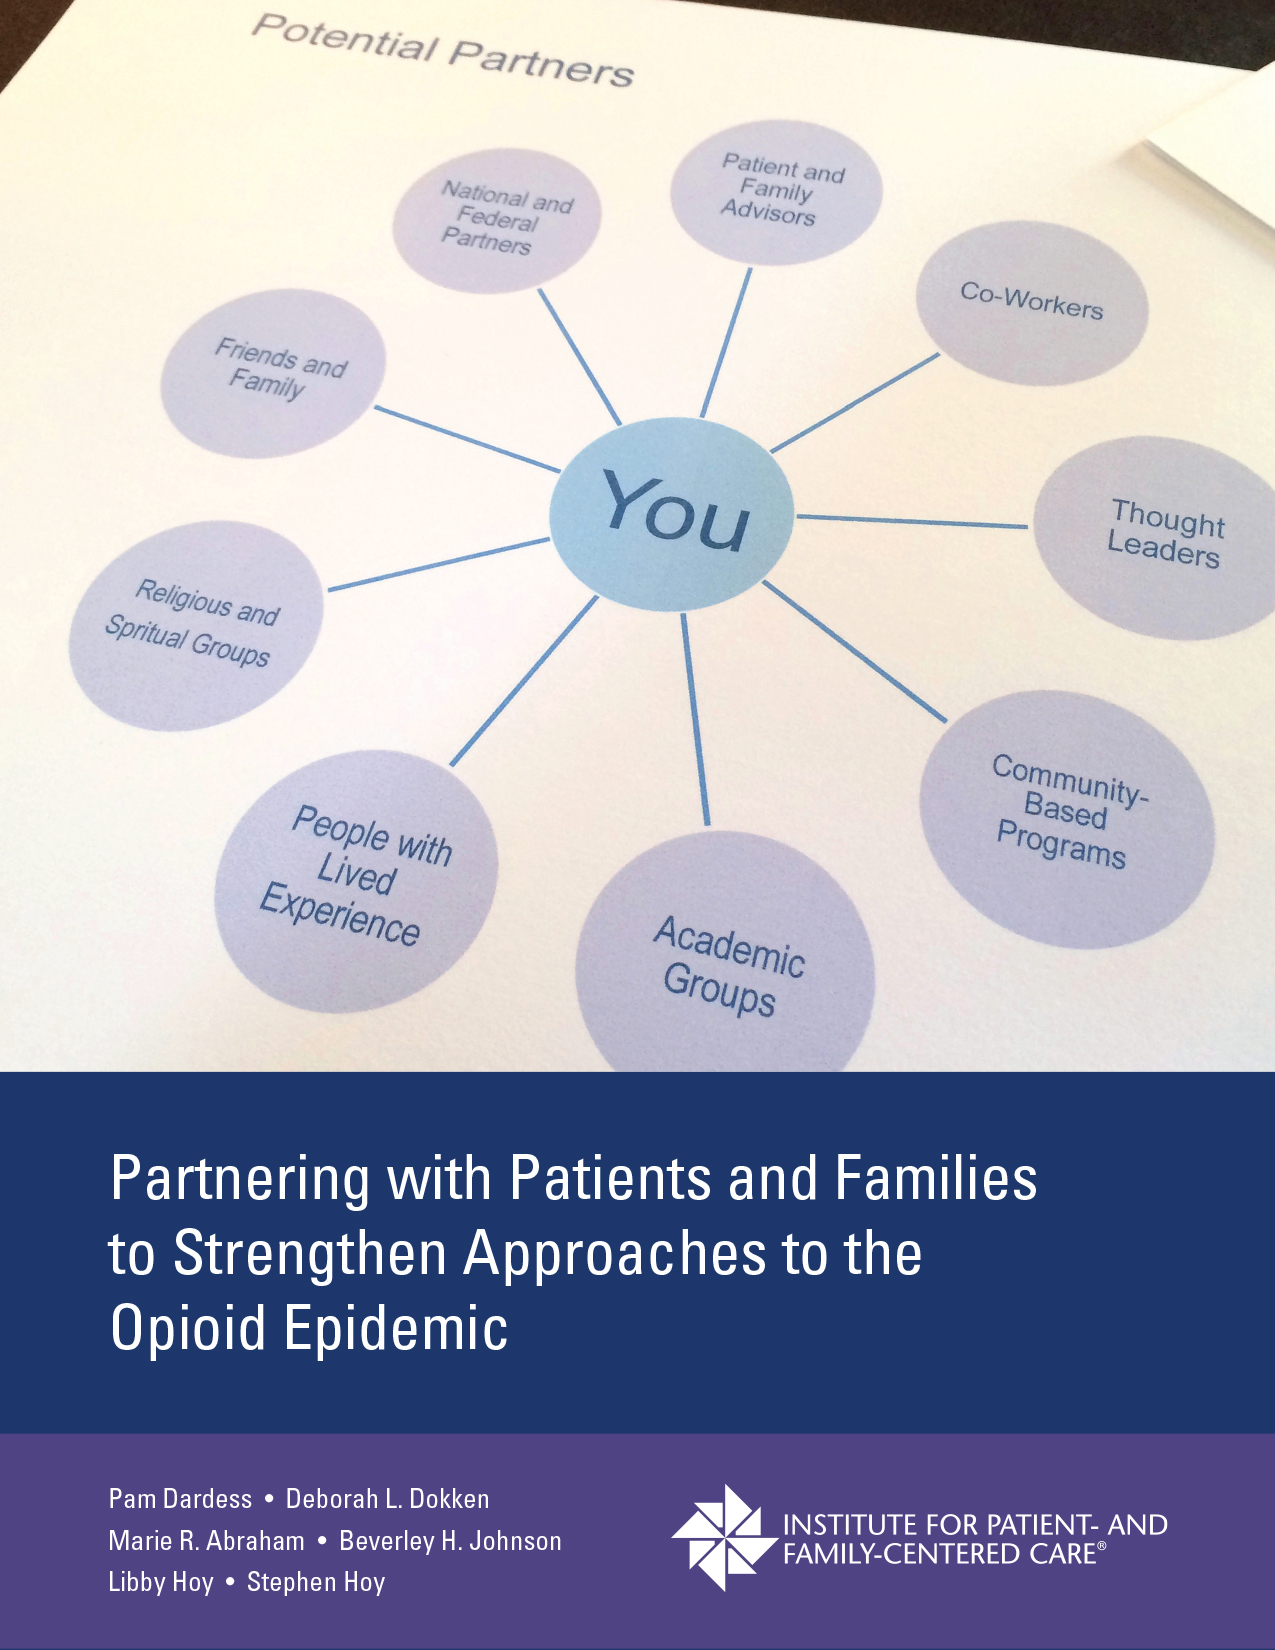 IPFCC_Opioid_Booklet_Cover_150dpi